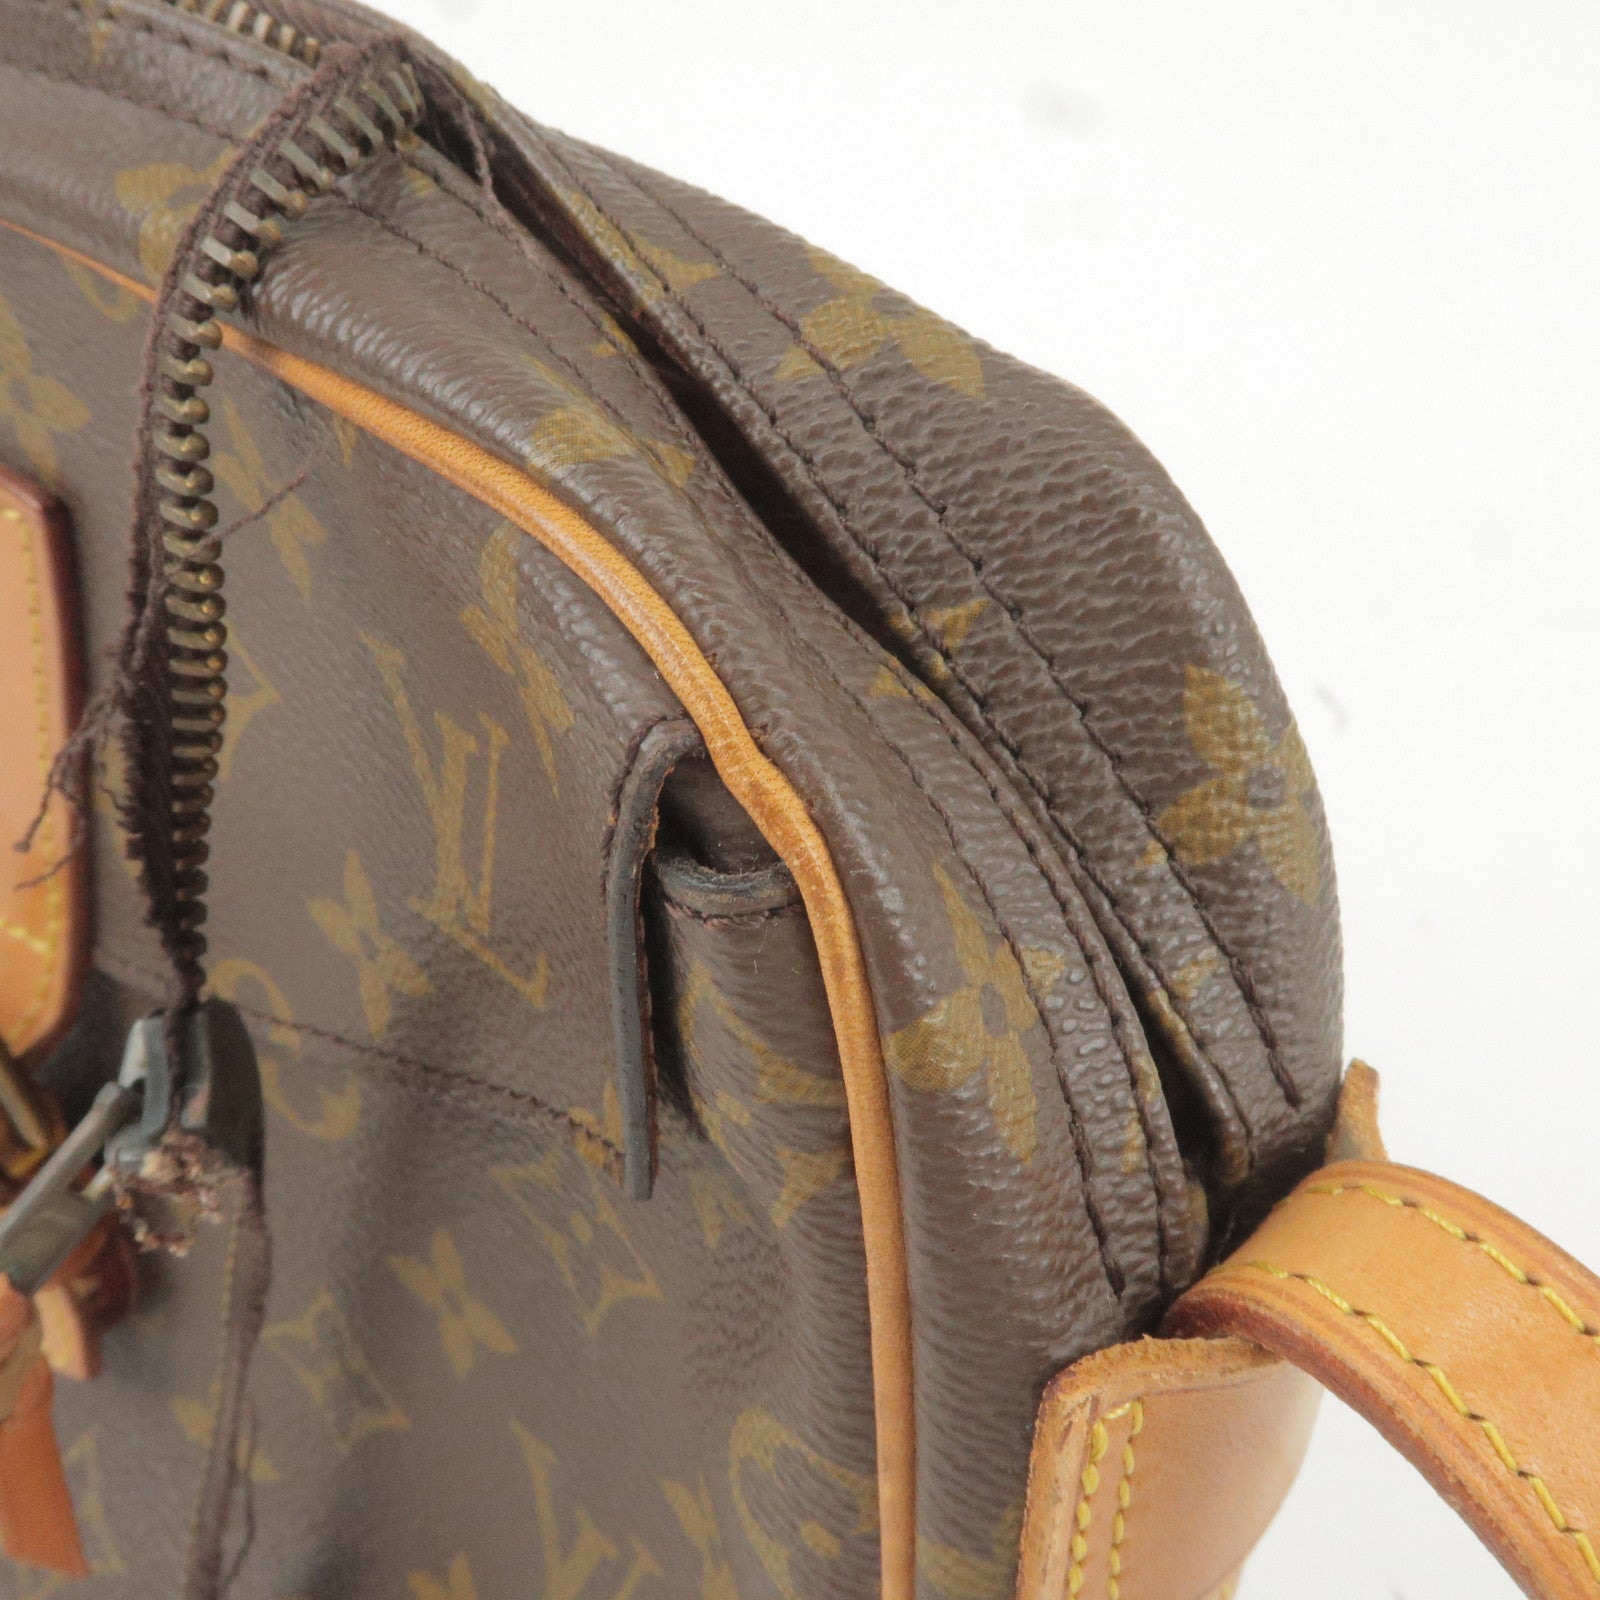 Louis Vuitton Monogram Canvas Limited Edition Frank Gehry Twisted Box Bag